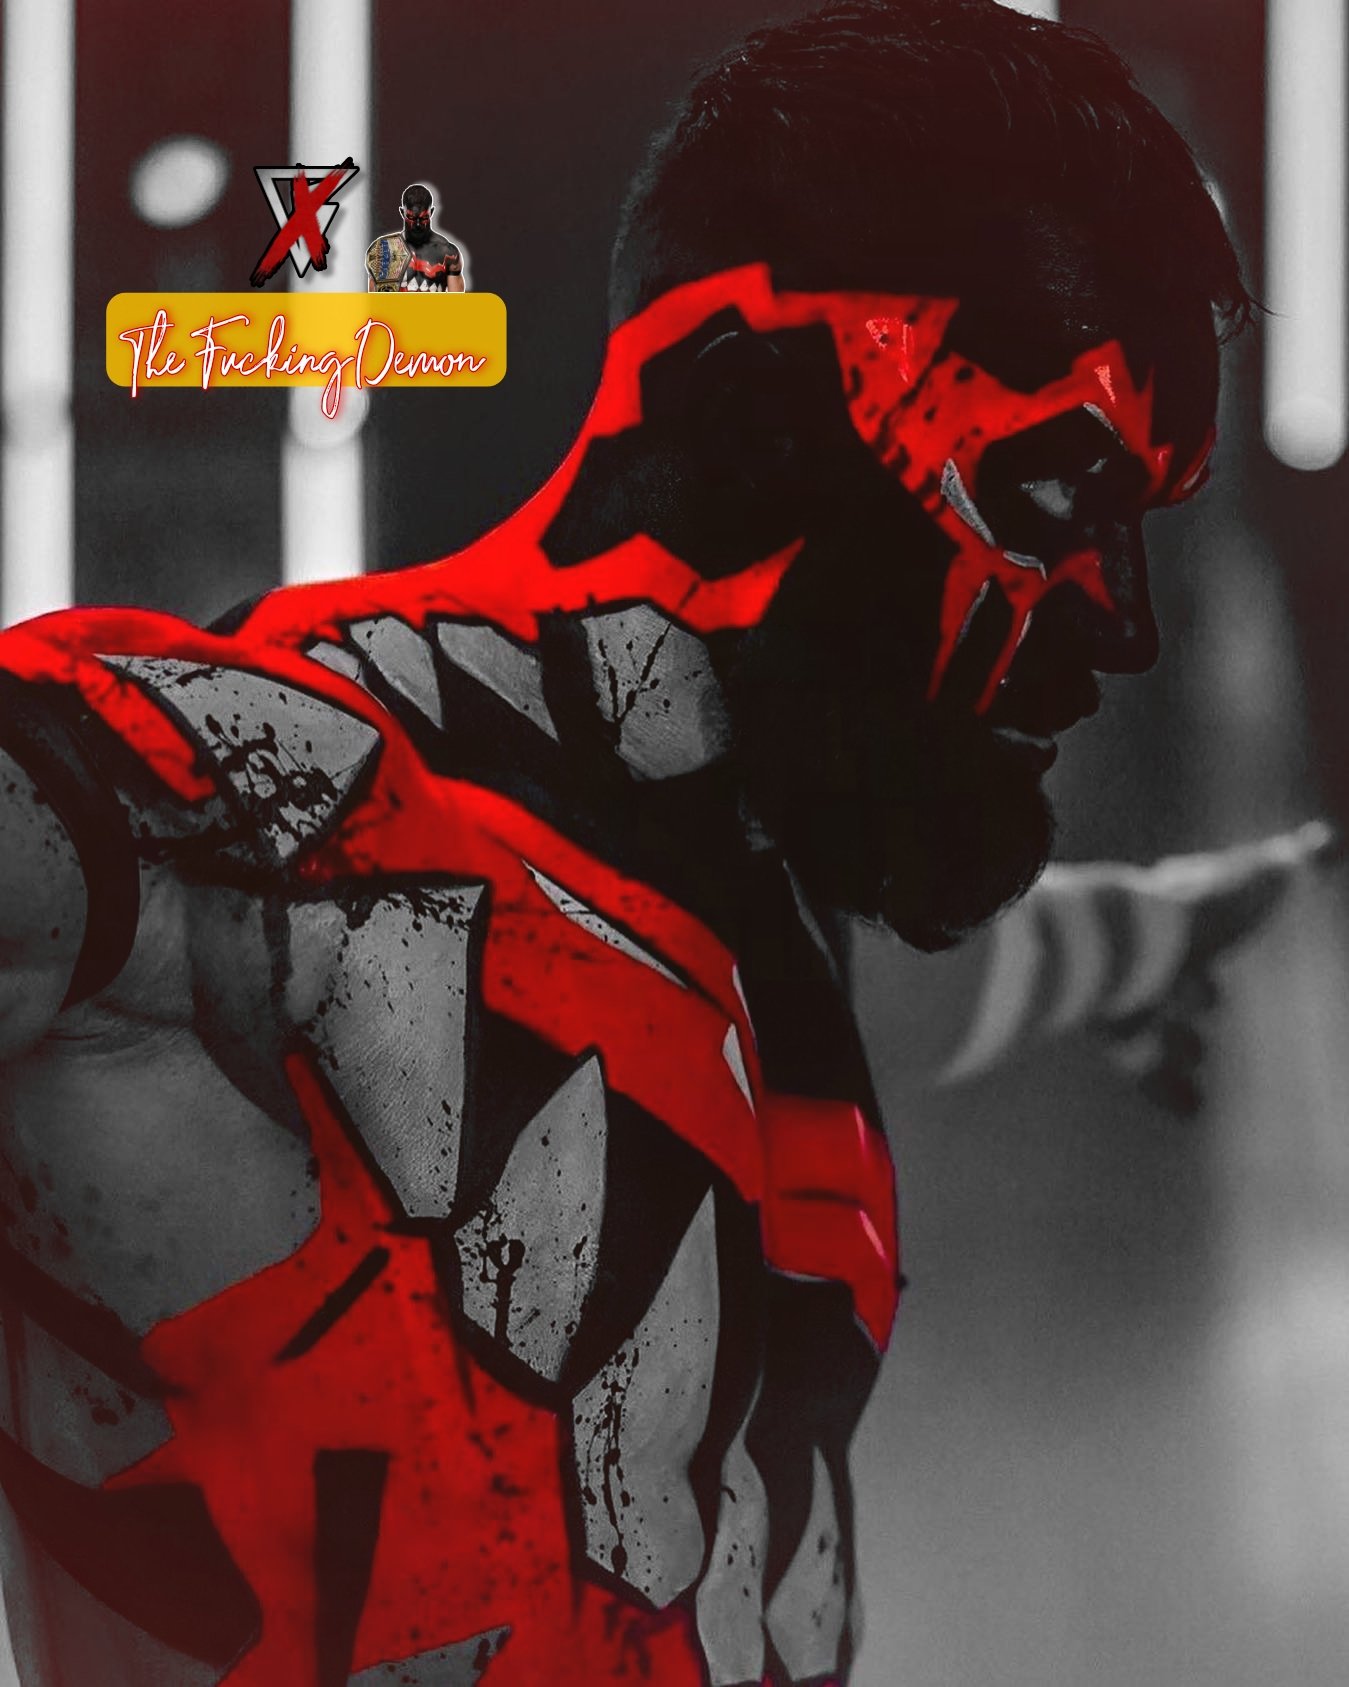 ❌, The Real Demon;
     @𝗧𝗵𝗲𝗣𝗿𝗶𝗻𝗫𝗲: 𝖢𝗁𝖺𝗆𝗉 (🇺🇲)

             𝖳𝗁𝖾 𝖨𝗋𝗅𝖺𝗇𝖽 𝖥𝗂𝗀𝗁𝗍𝖾𝗋.